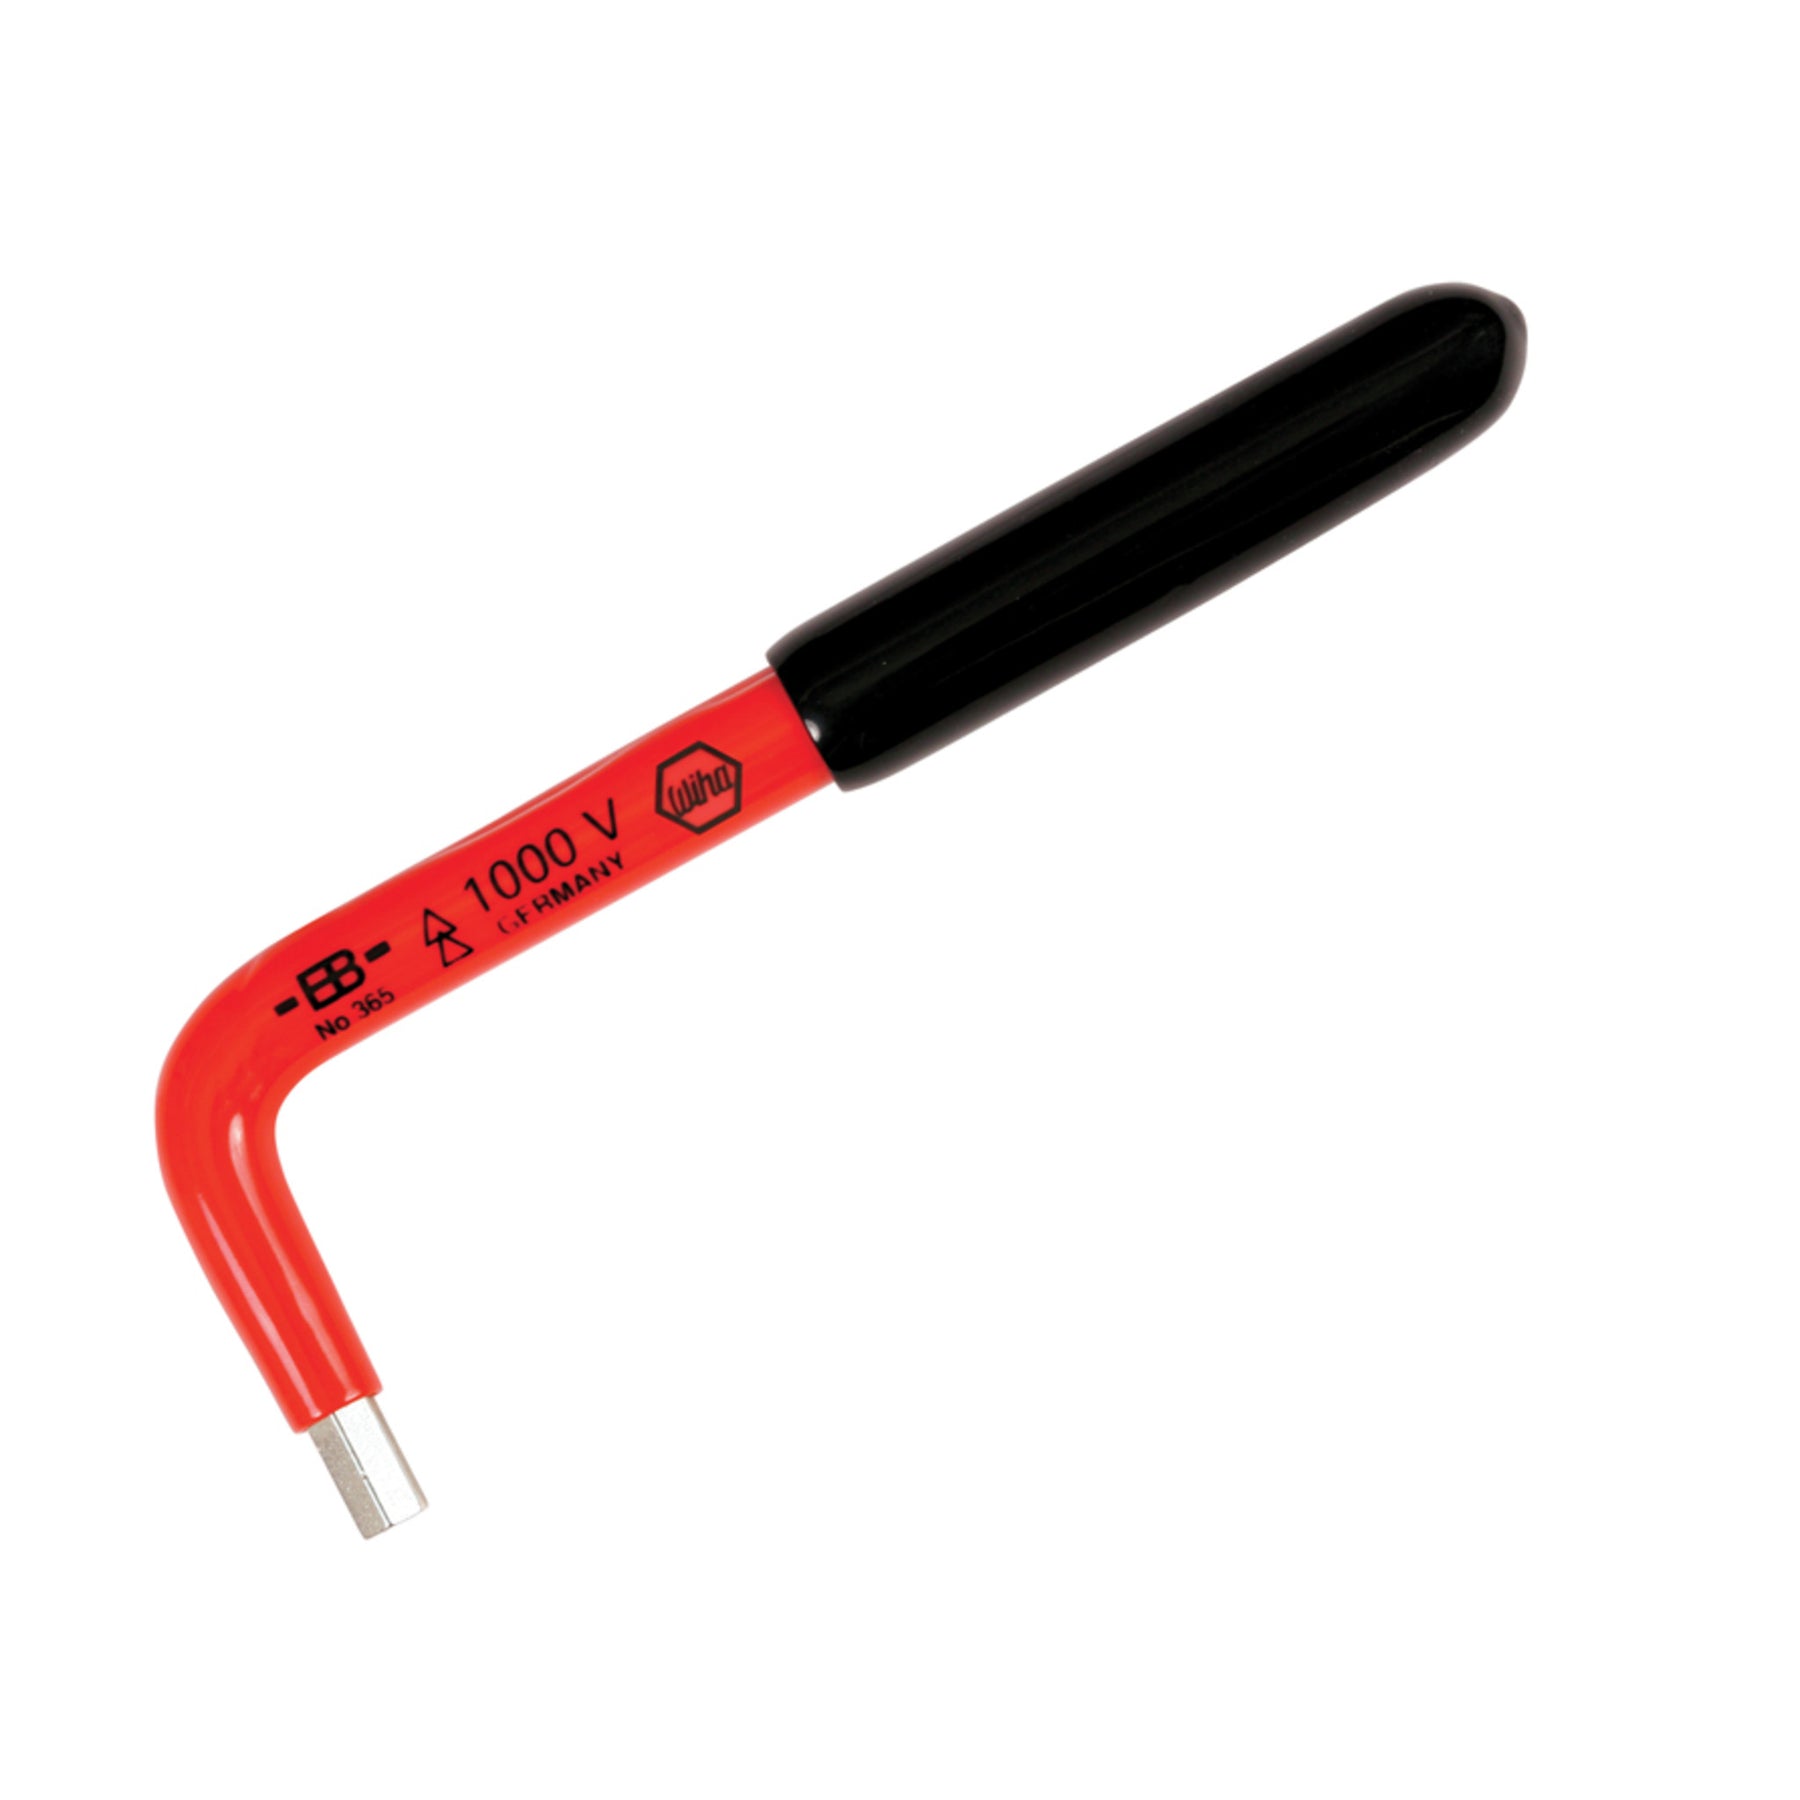 Insulated Hex Key 7/64" x 3.7"